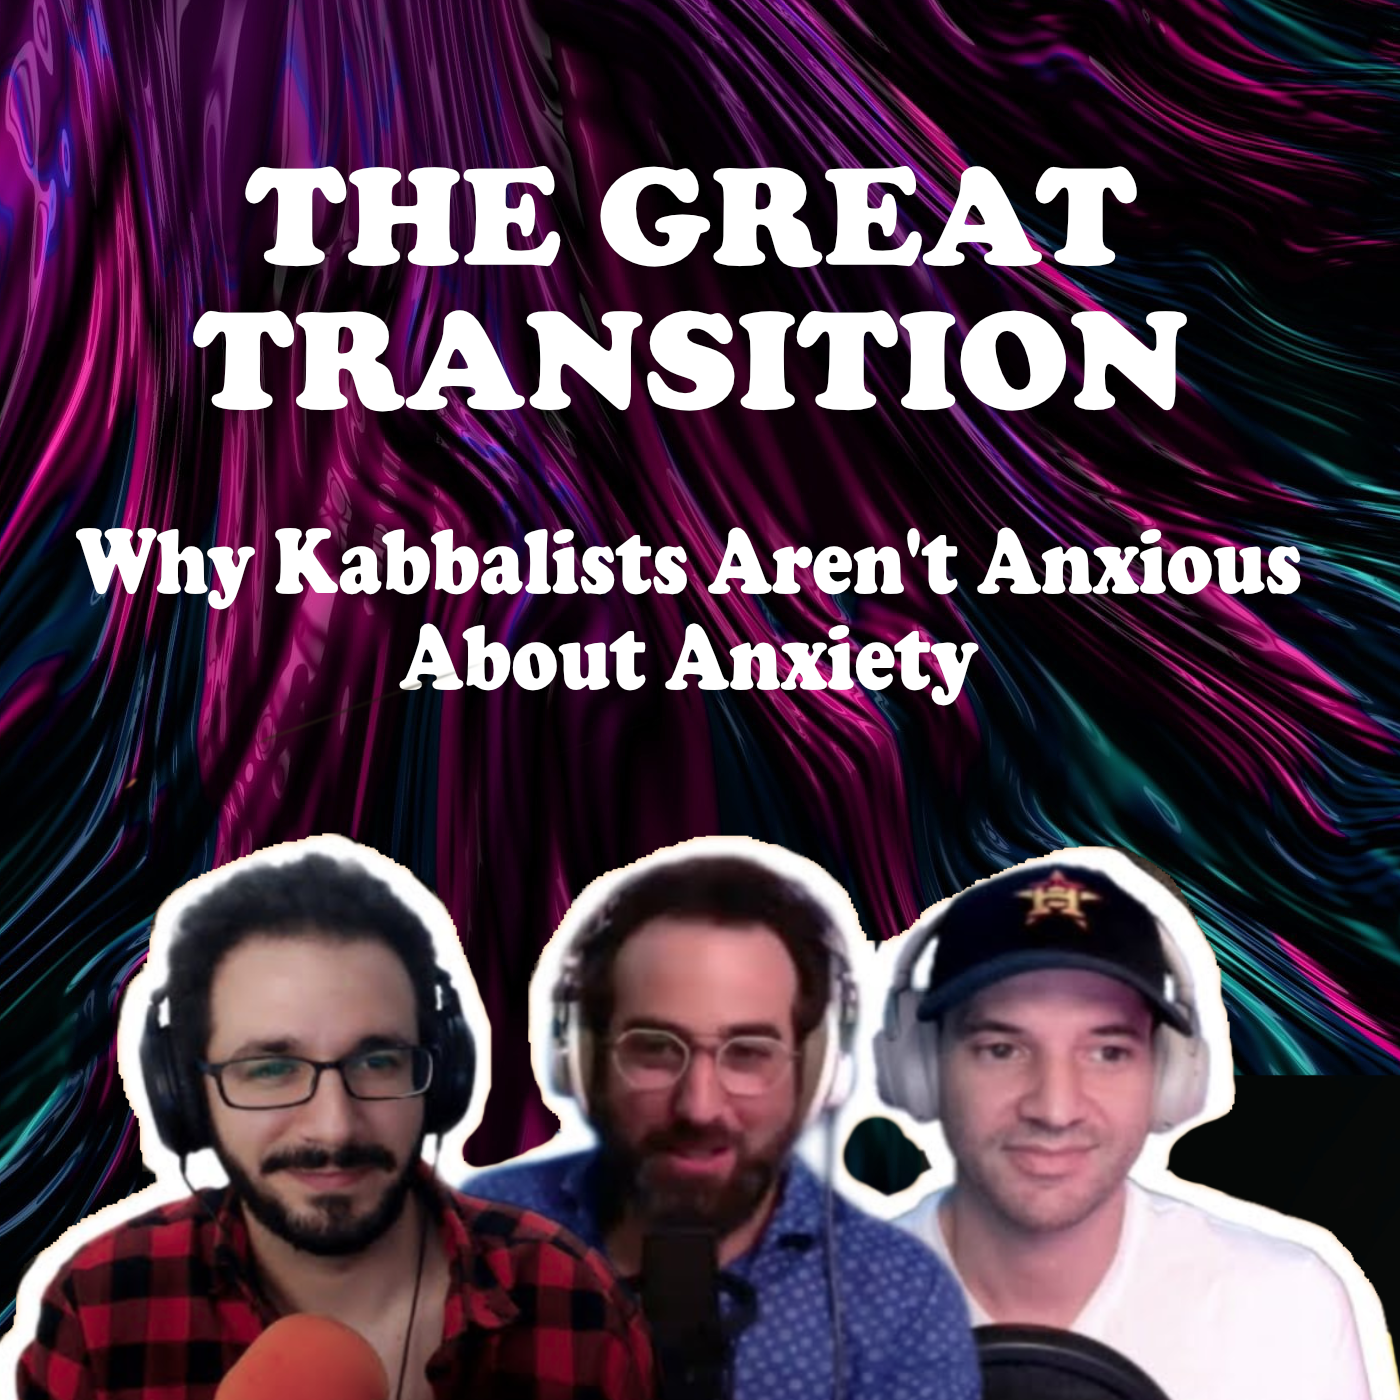 The Great Transition - Why Kabbalists Aren’t Anxious About Anxiety